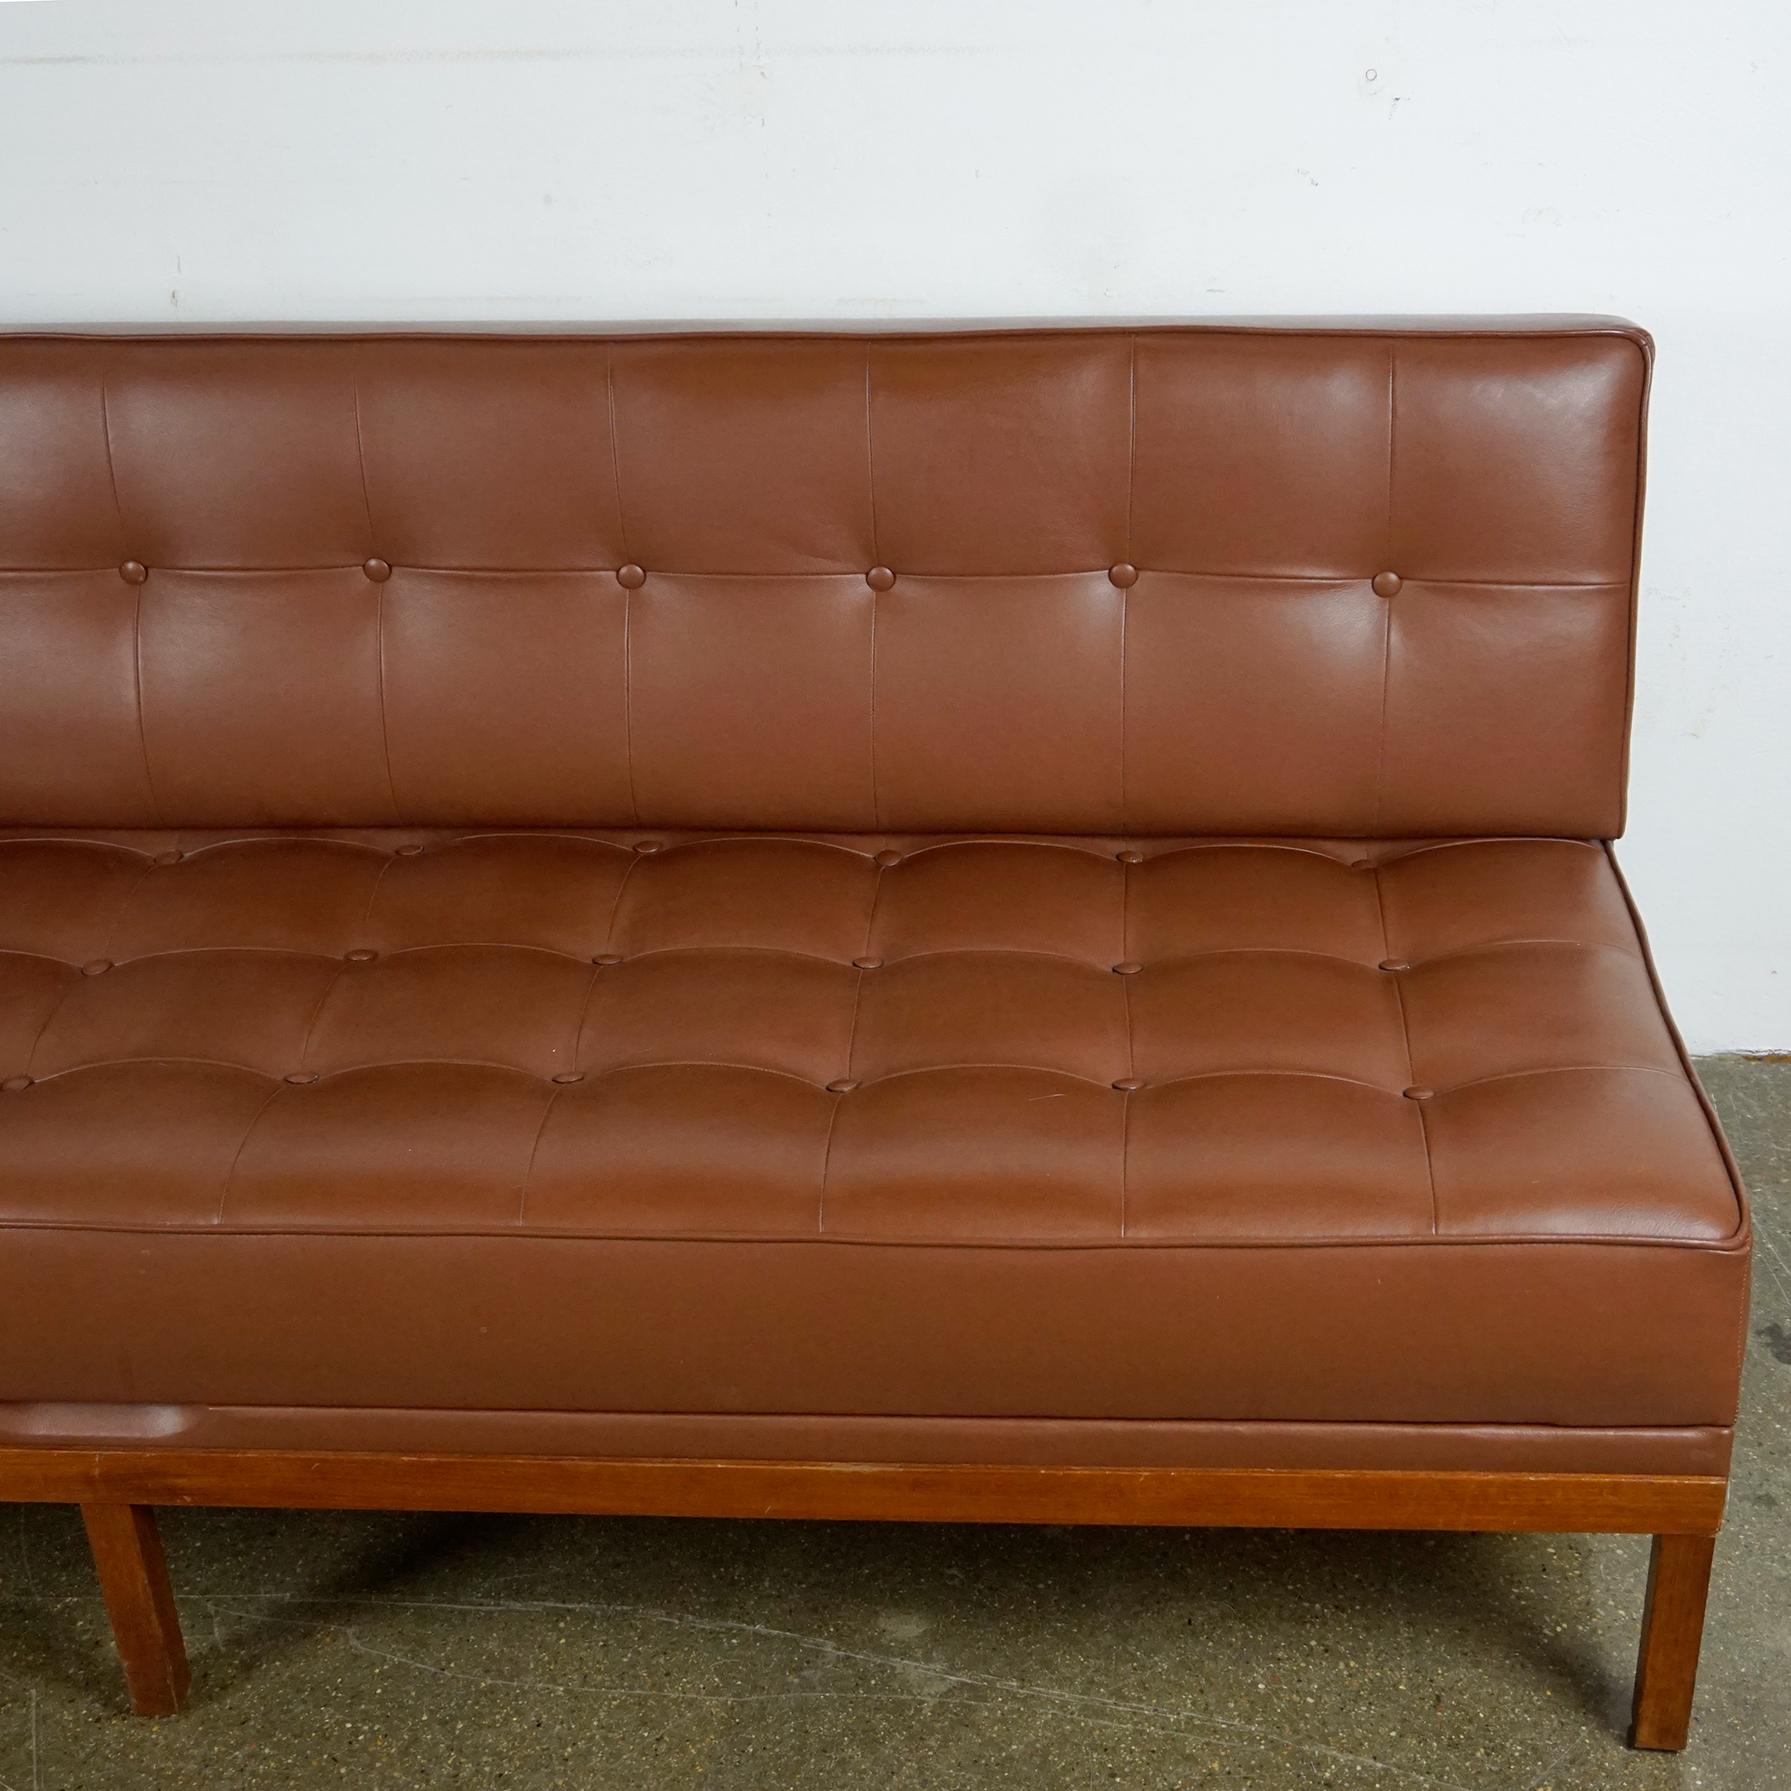 Mid-Century Modern Cognac Leather Sofa or Daybed by Johannes Spalt for Wittmann 1